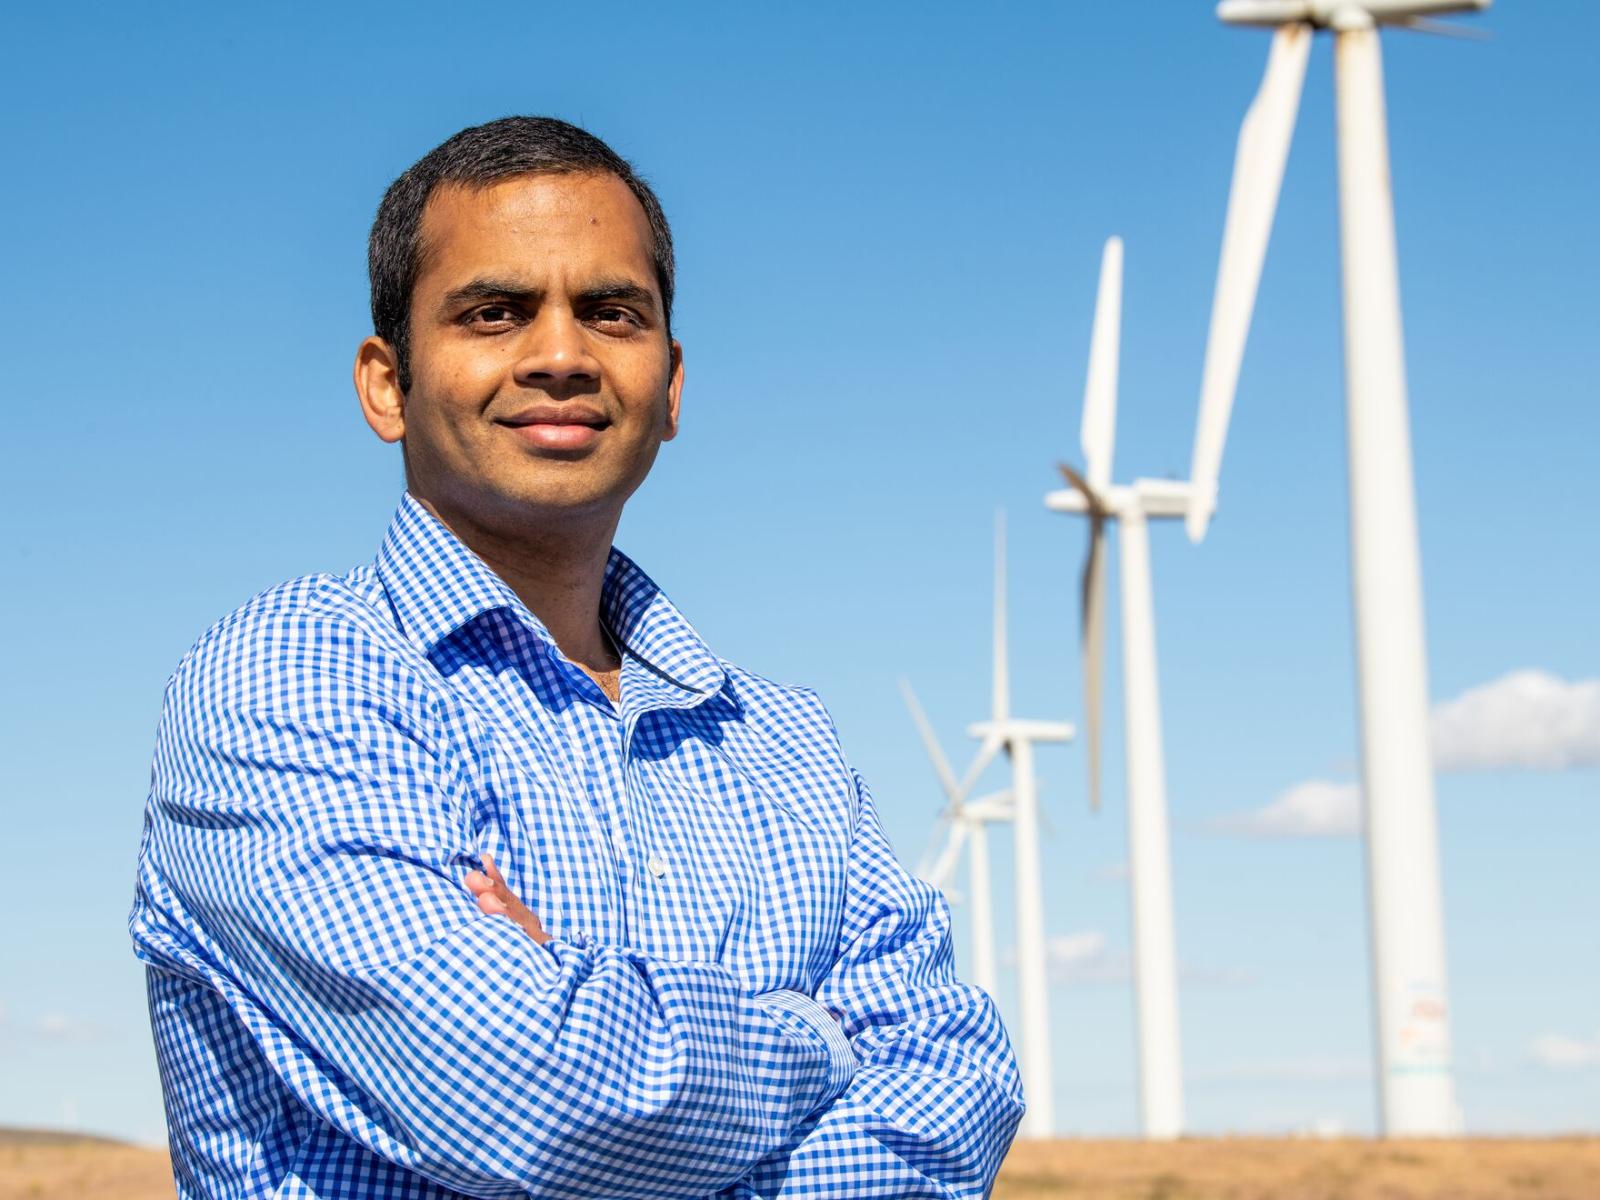 Man standing in front of wind turbines